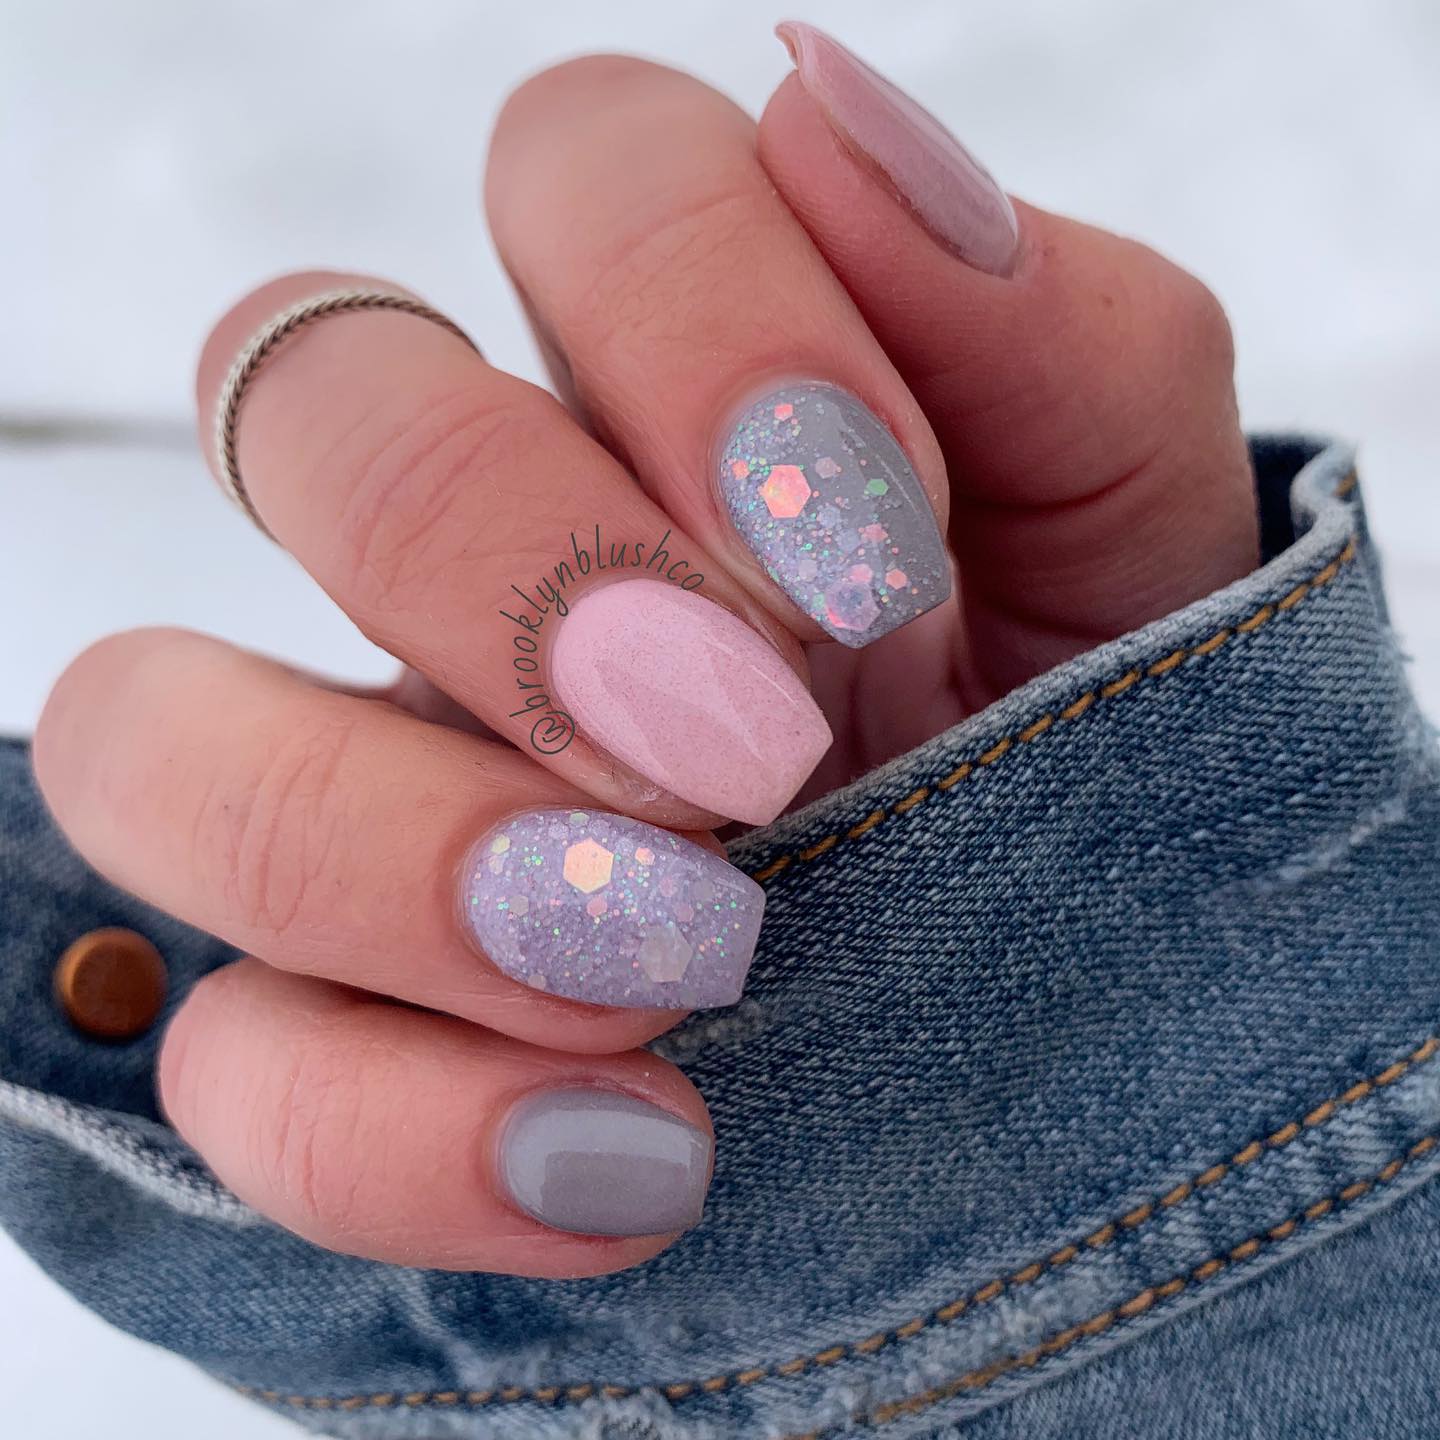 Grey and Pink Short Coffin Nails with Glitter